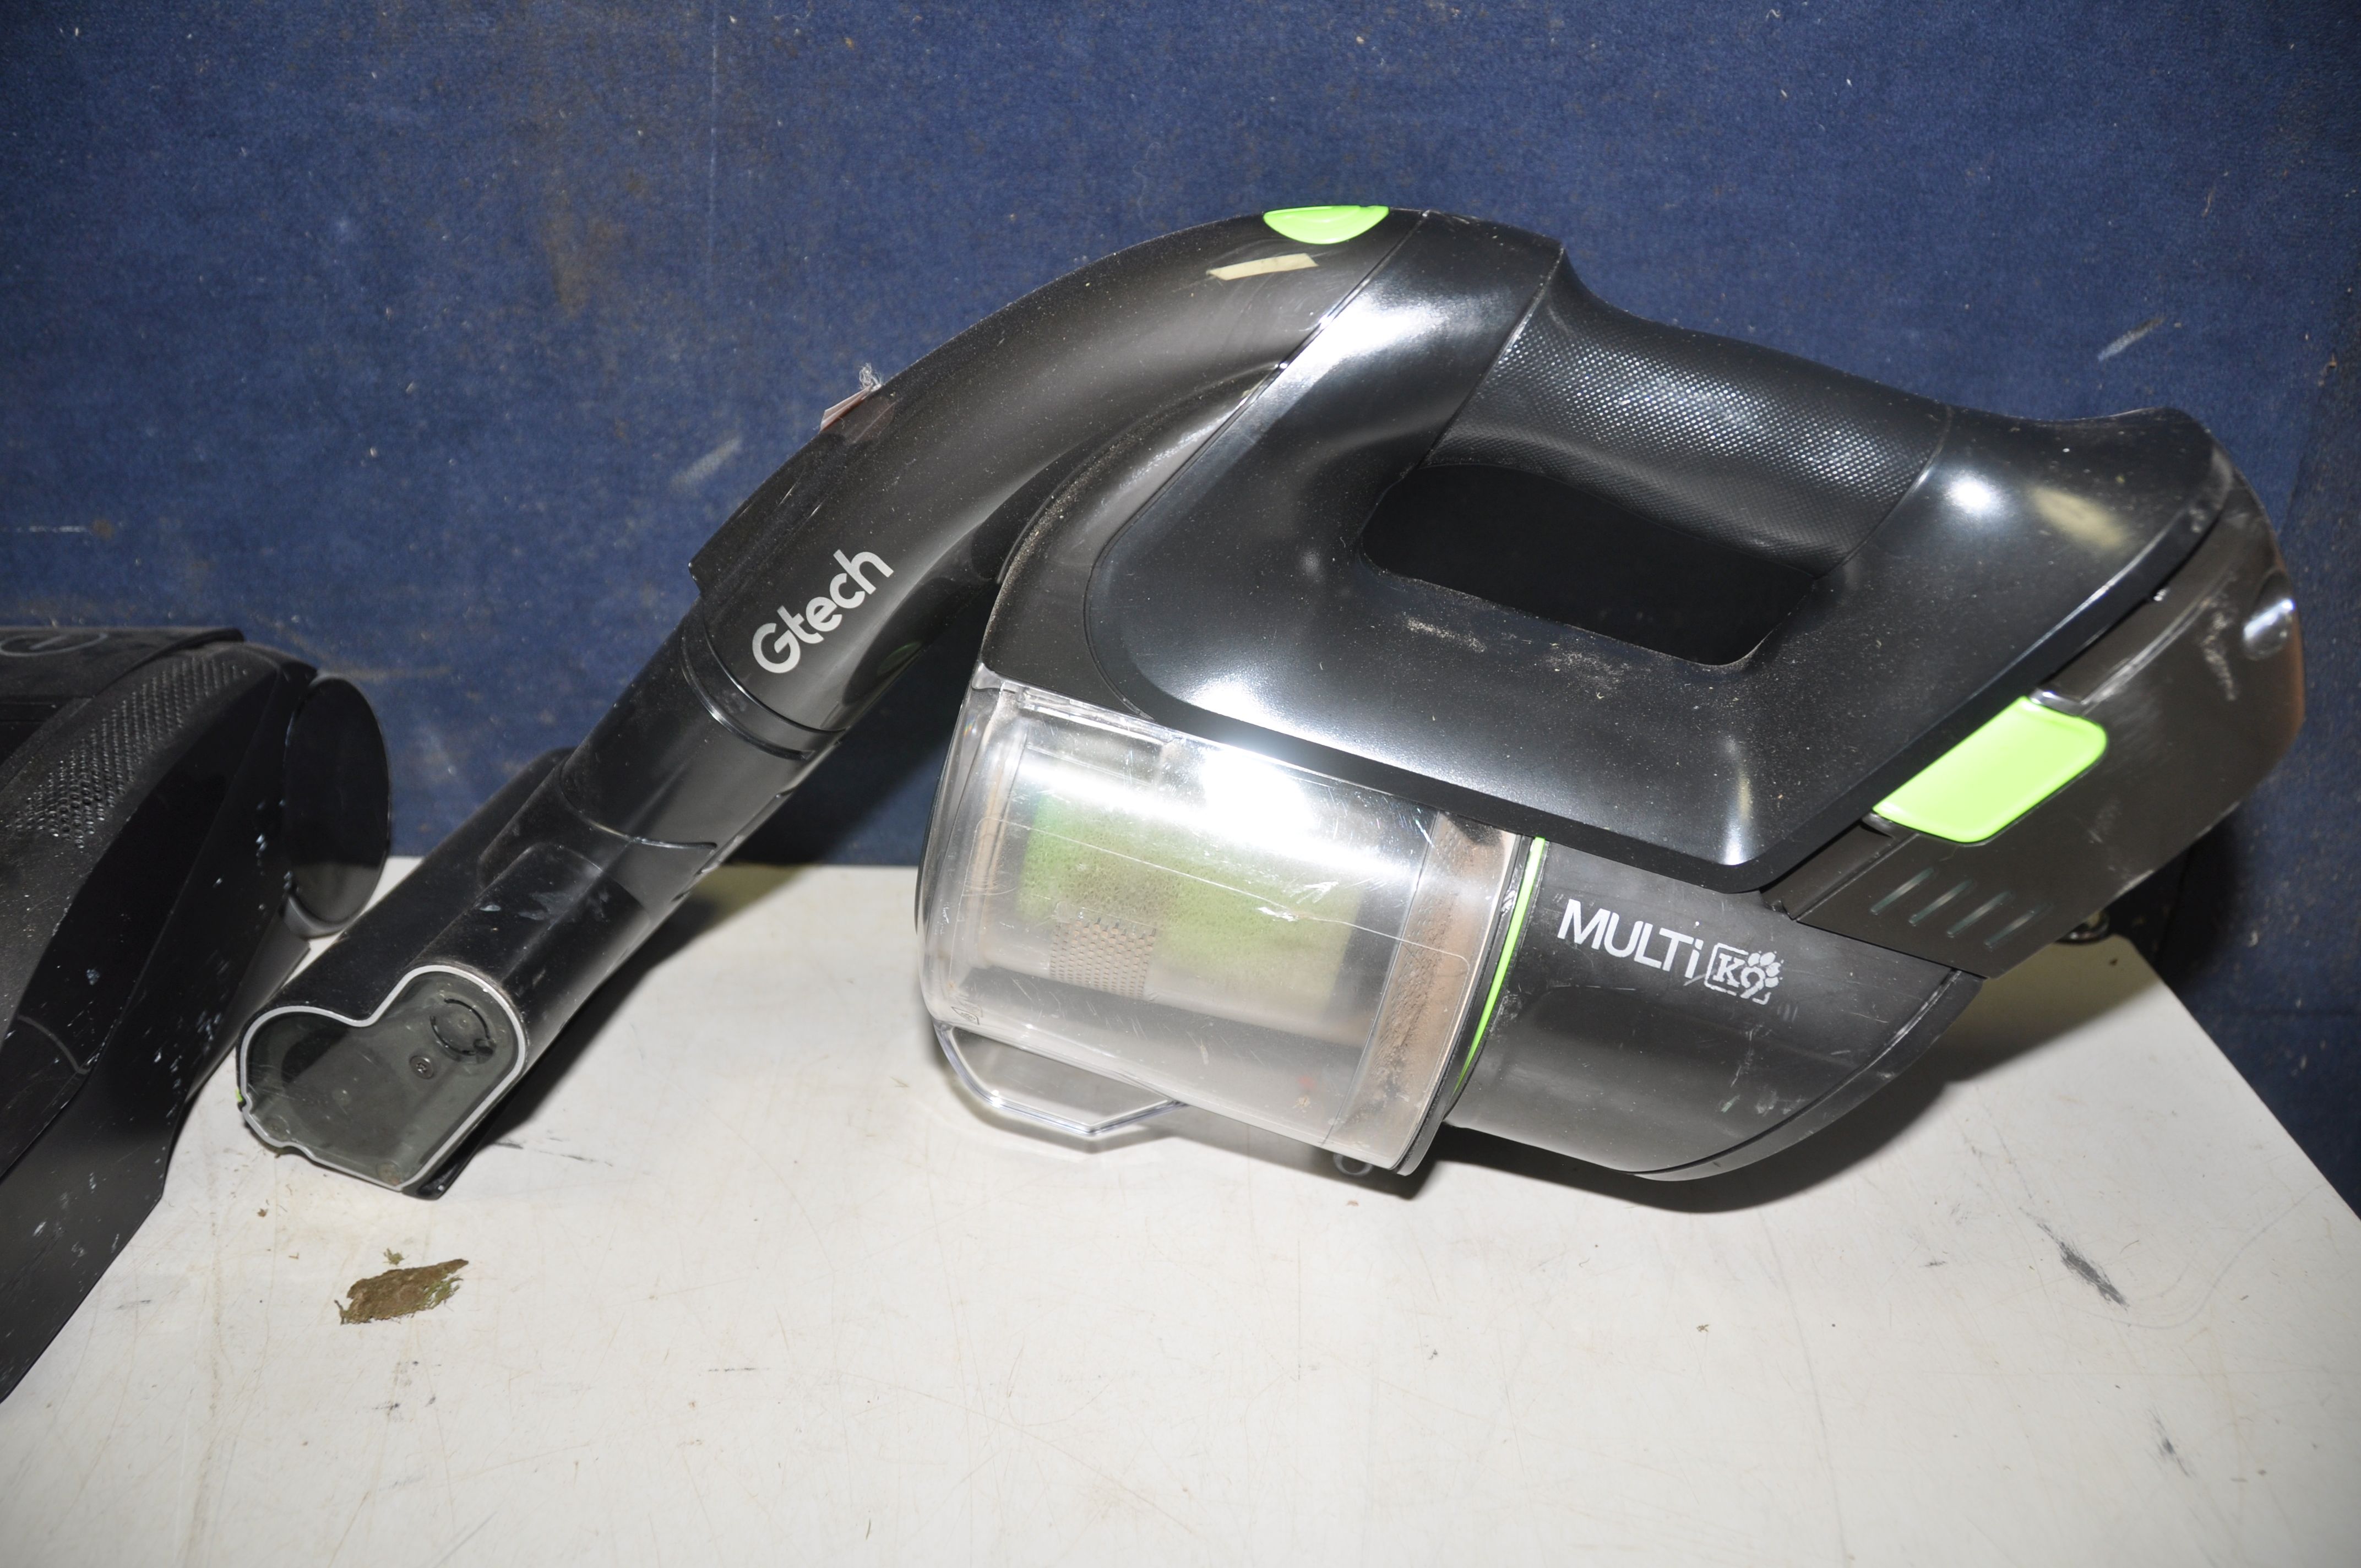 A G-TECH AIR RAM K9 VACUUM with charger, along with a G-tech multi K9 with spare filter and air - Image 2 of 3